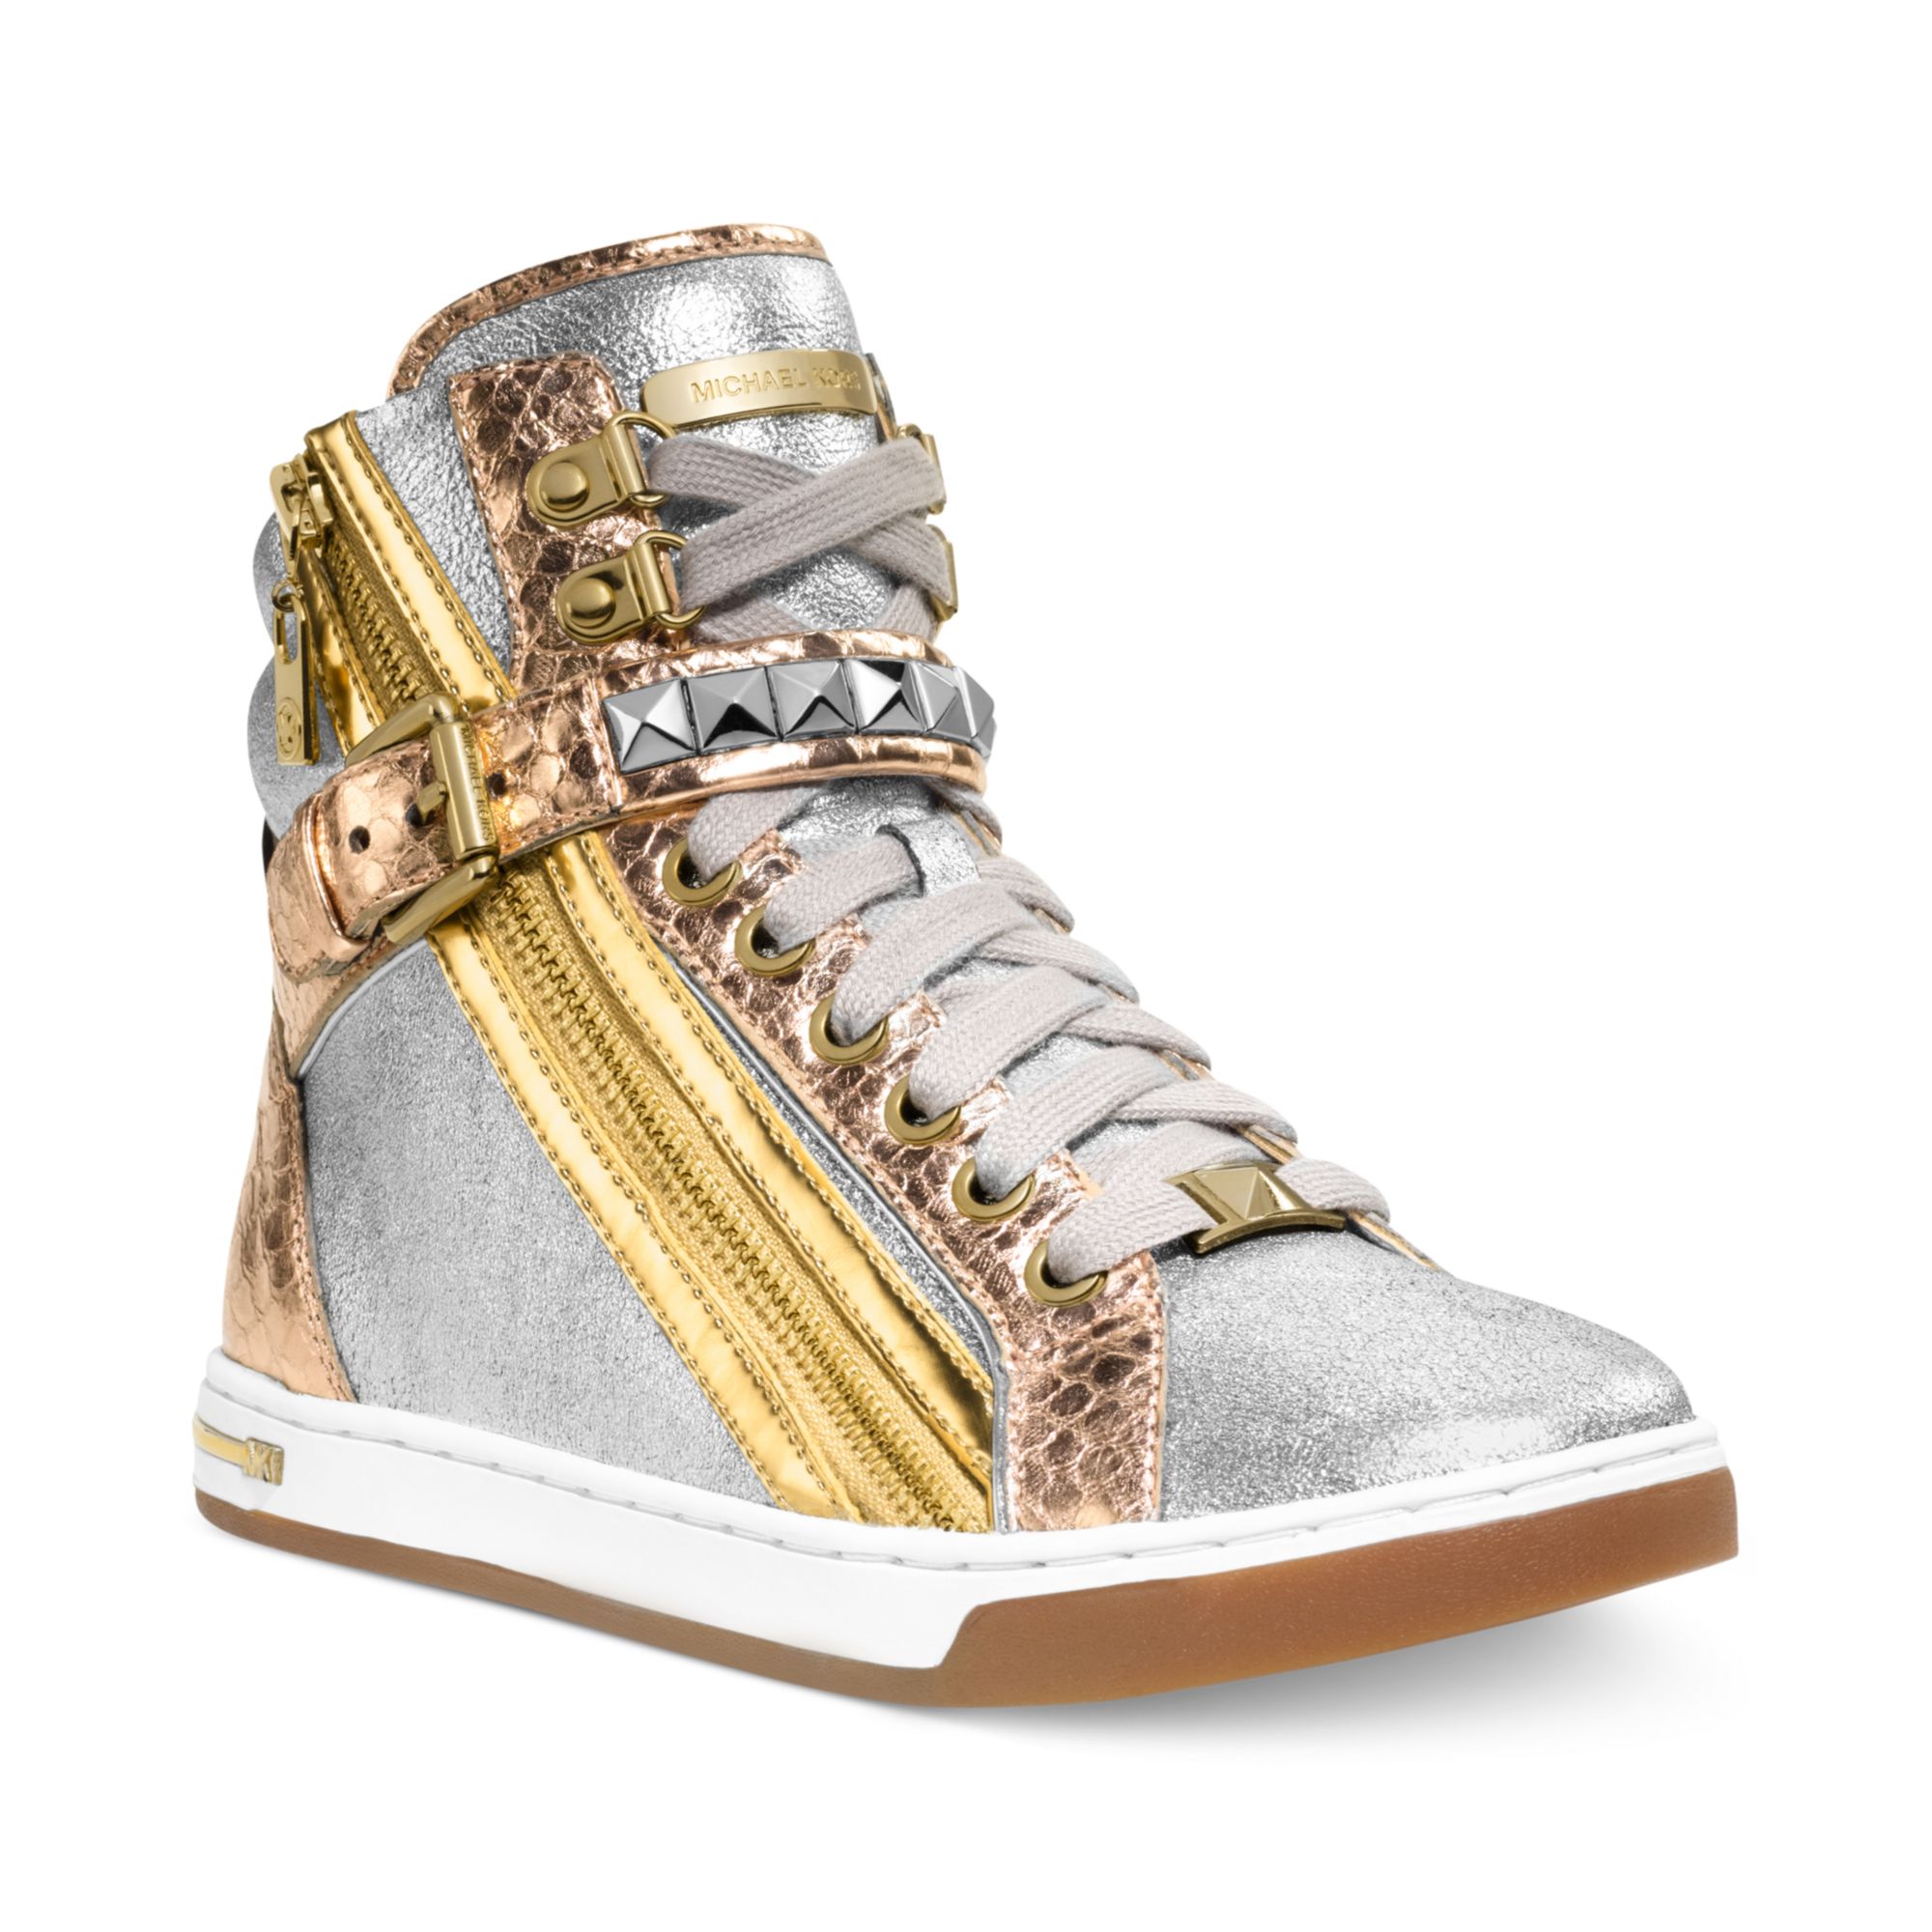 Michael Kors Glam Studded High Top Sneakers in Pink - Lyst